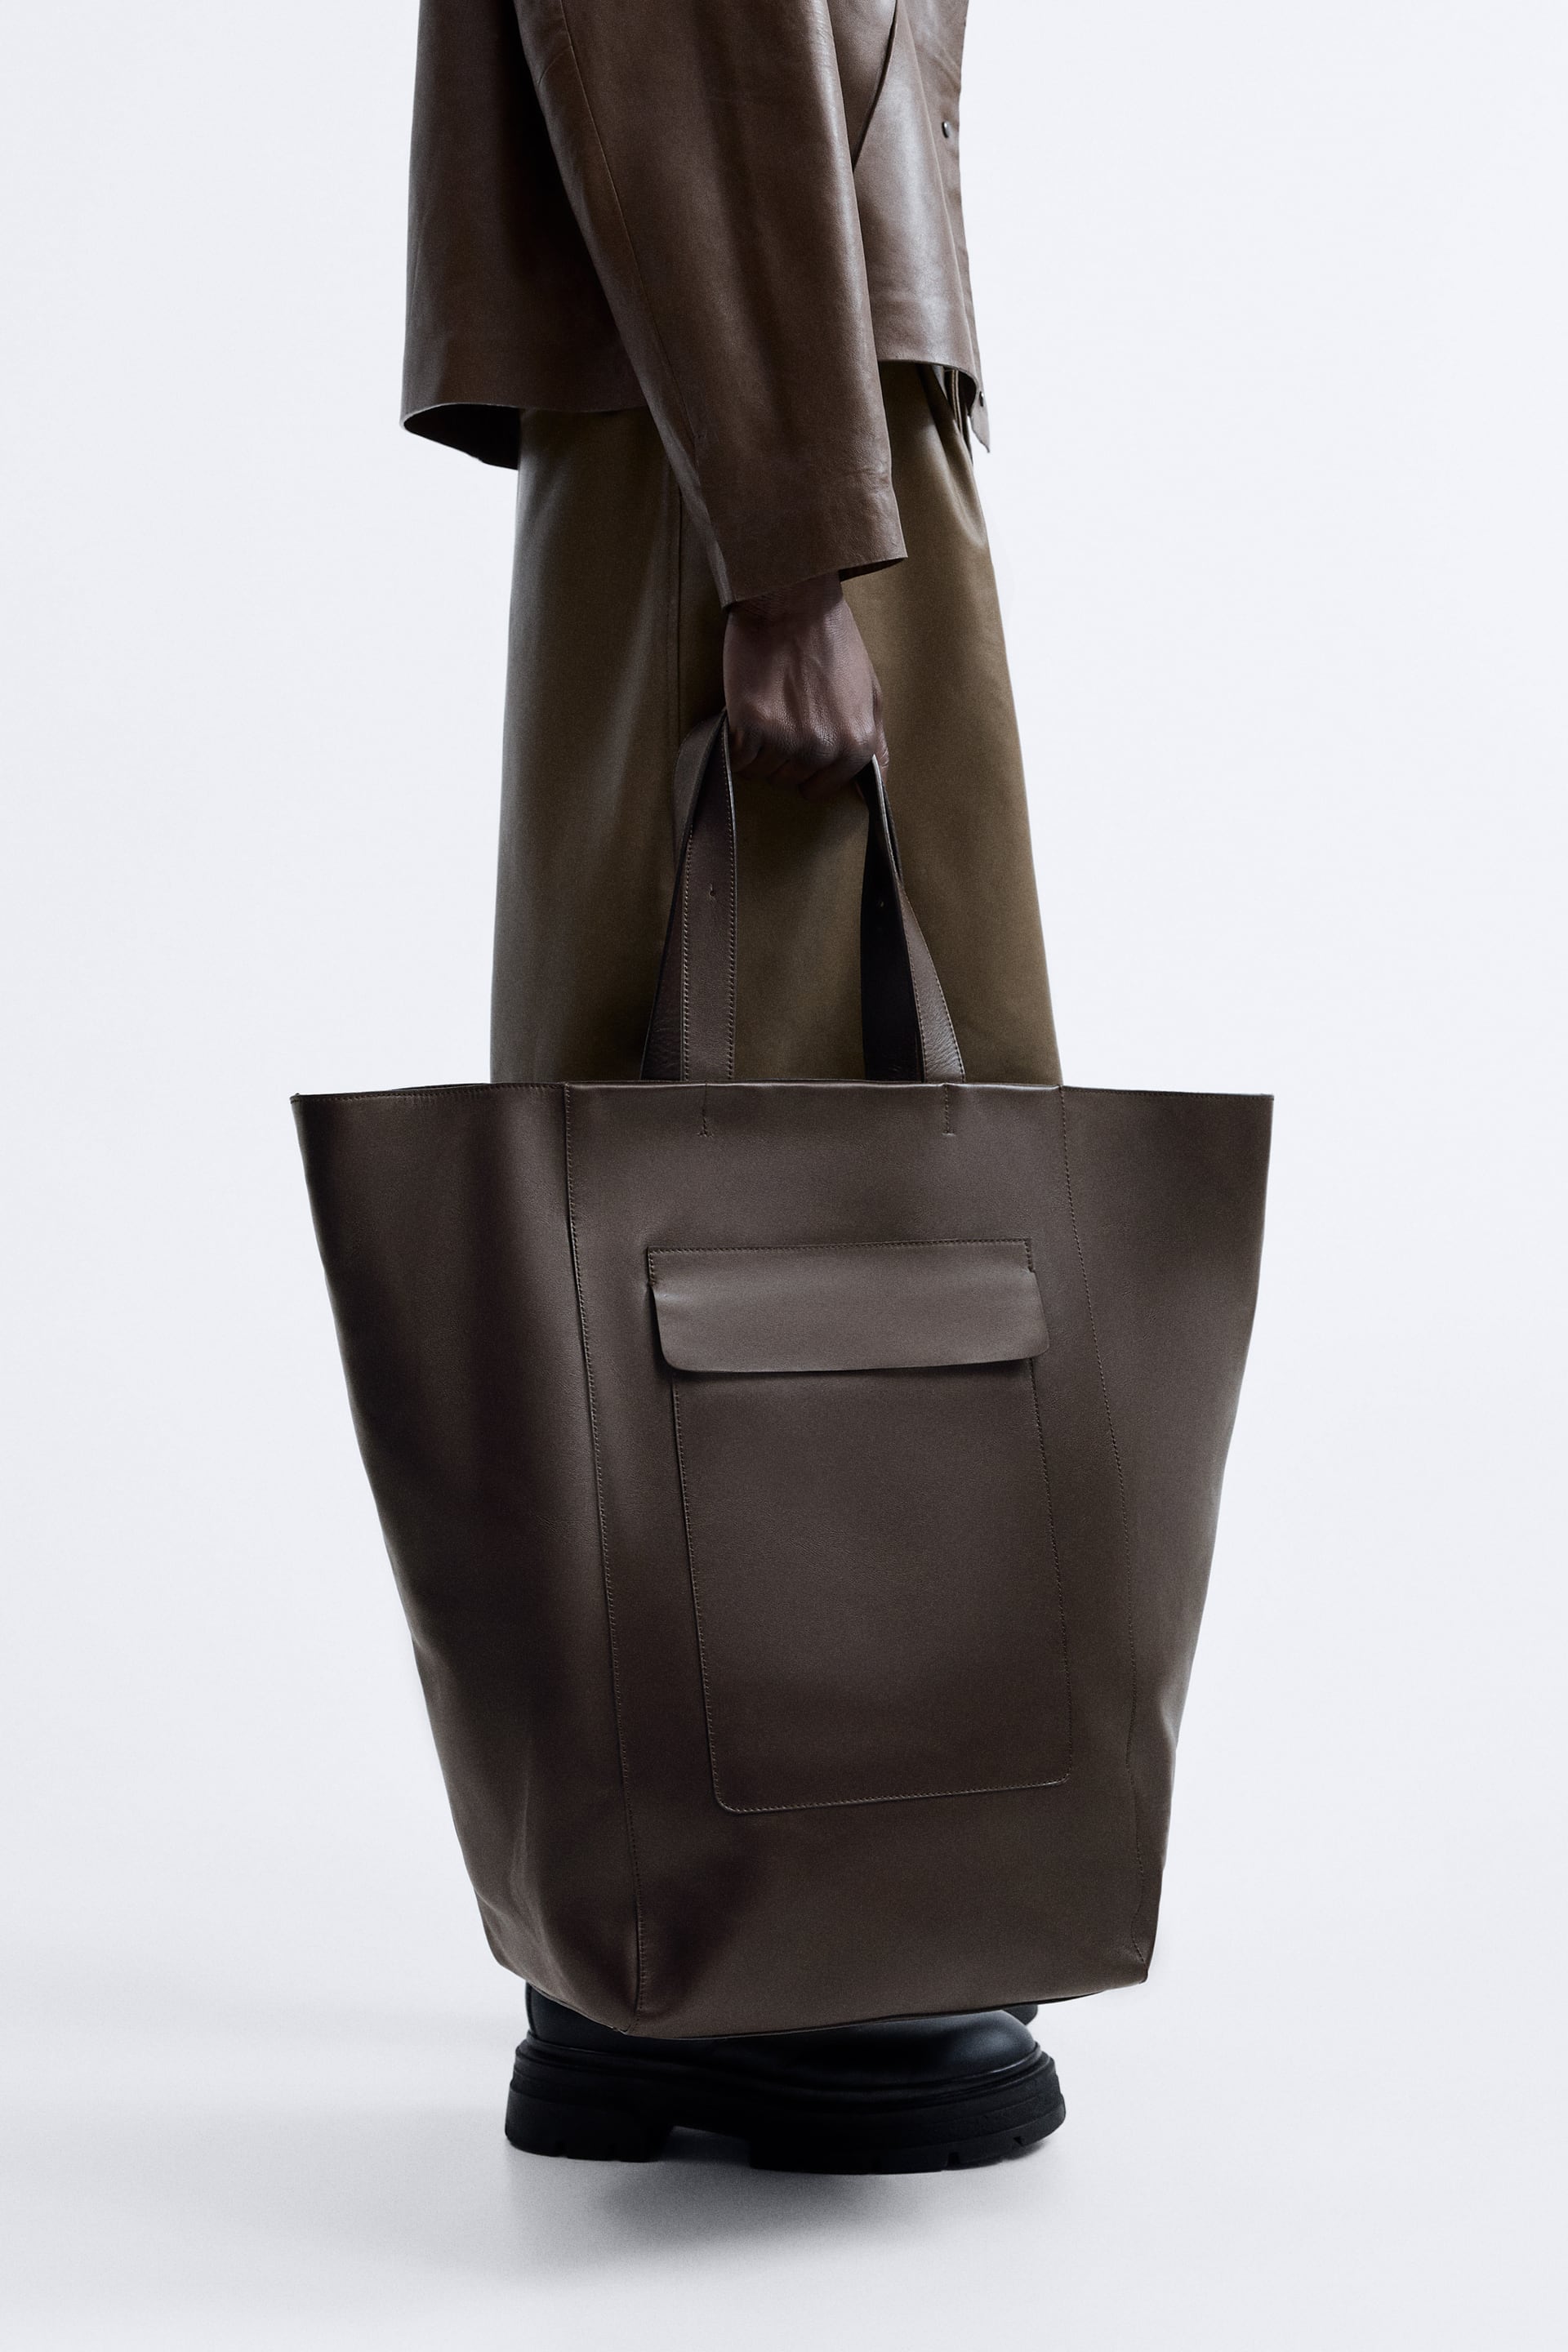 Recollection Planting trees staff NAPPA LEATHER TOTE BAG - LIMITED EDITION - Brown | ZARA United States